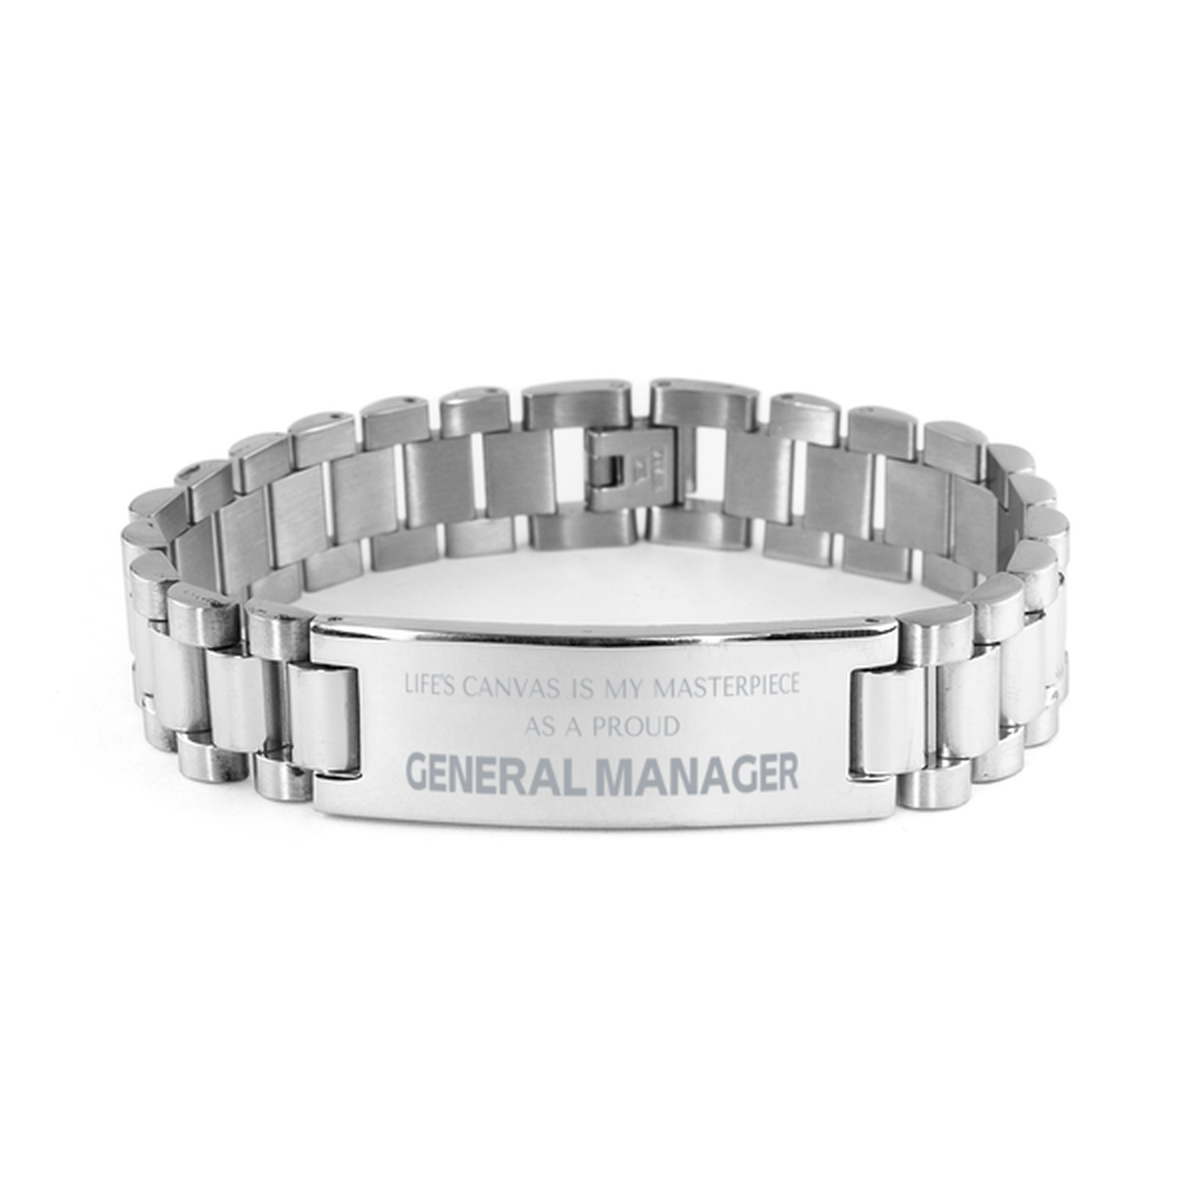 Proud General Manager Gifts, Life's canvas is my masterpiece, Epic Birthday Christmas Unique Ladder Stainless Steel Bracelet For General Manager, Coworkers, Men, Women, Friends